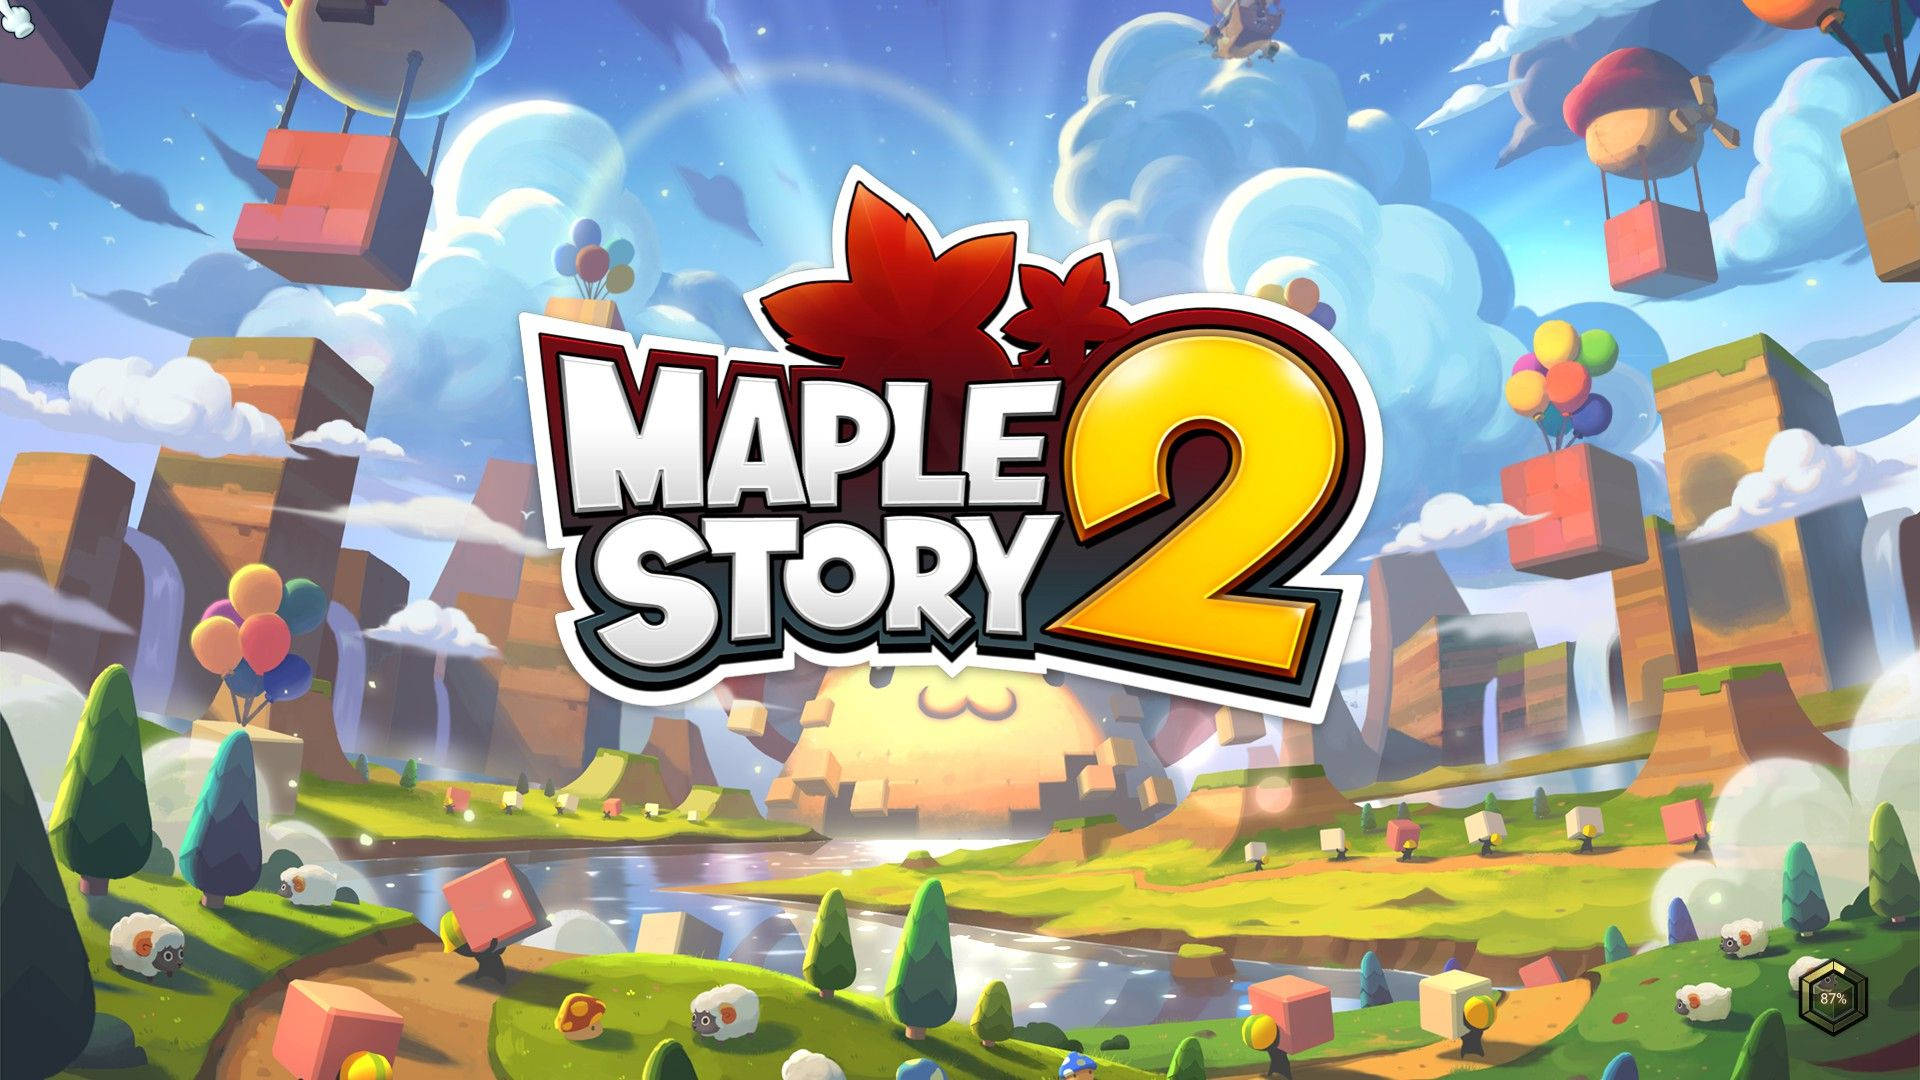 Join The Adventure in MapleStory 2 Wallpaper